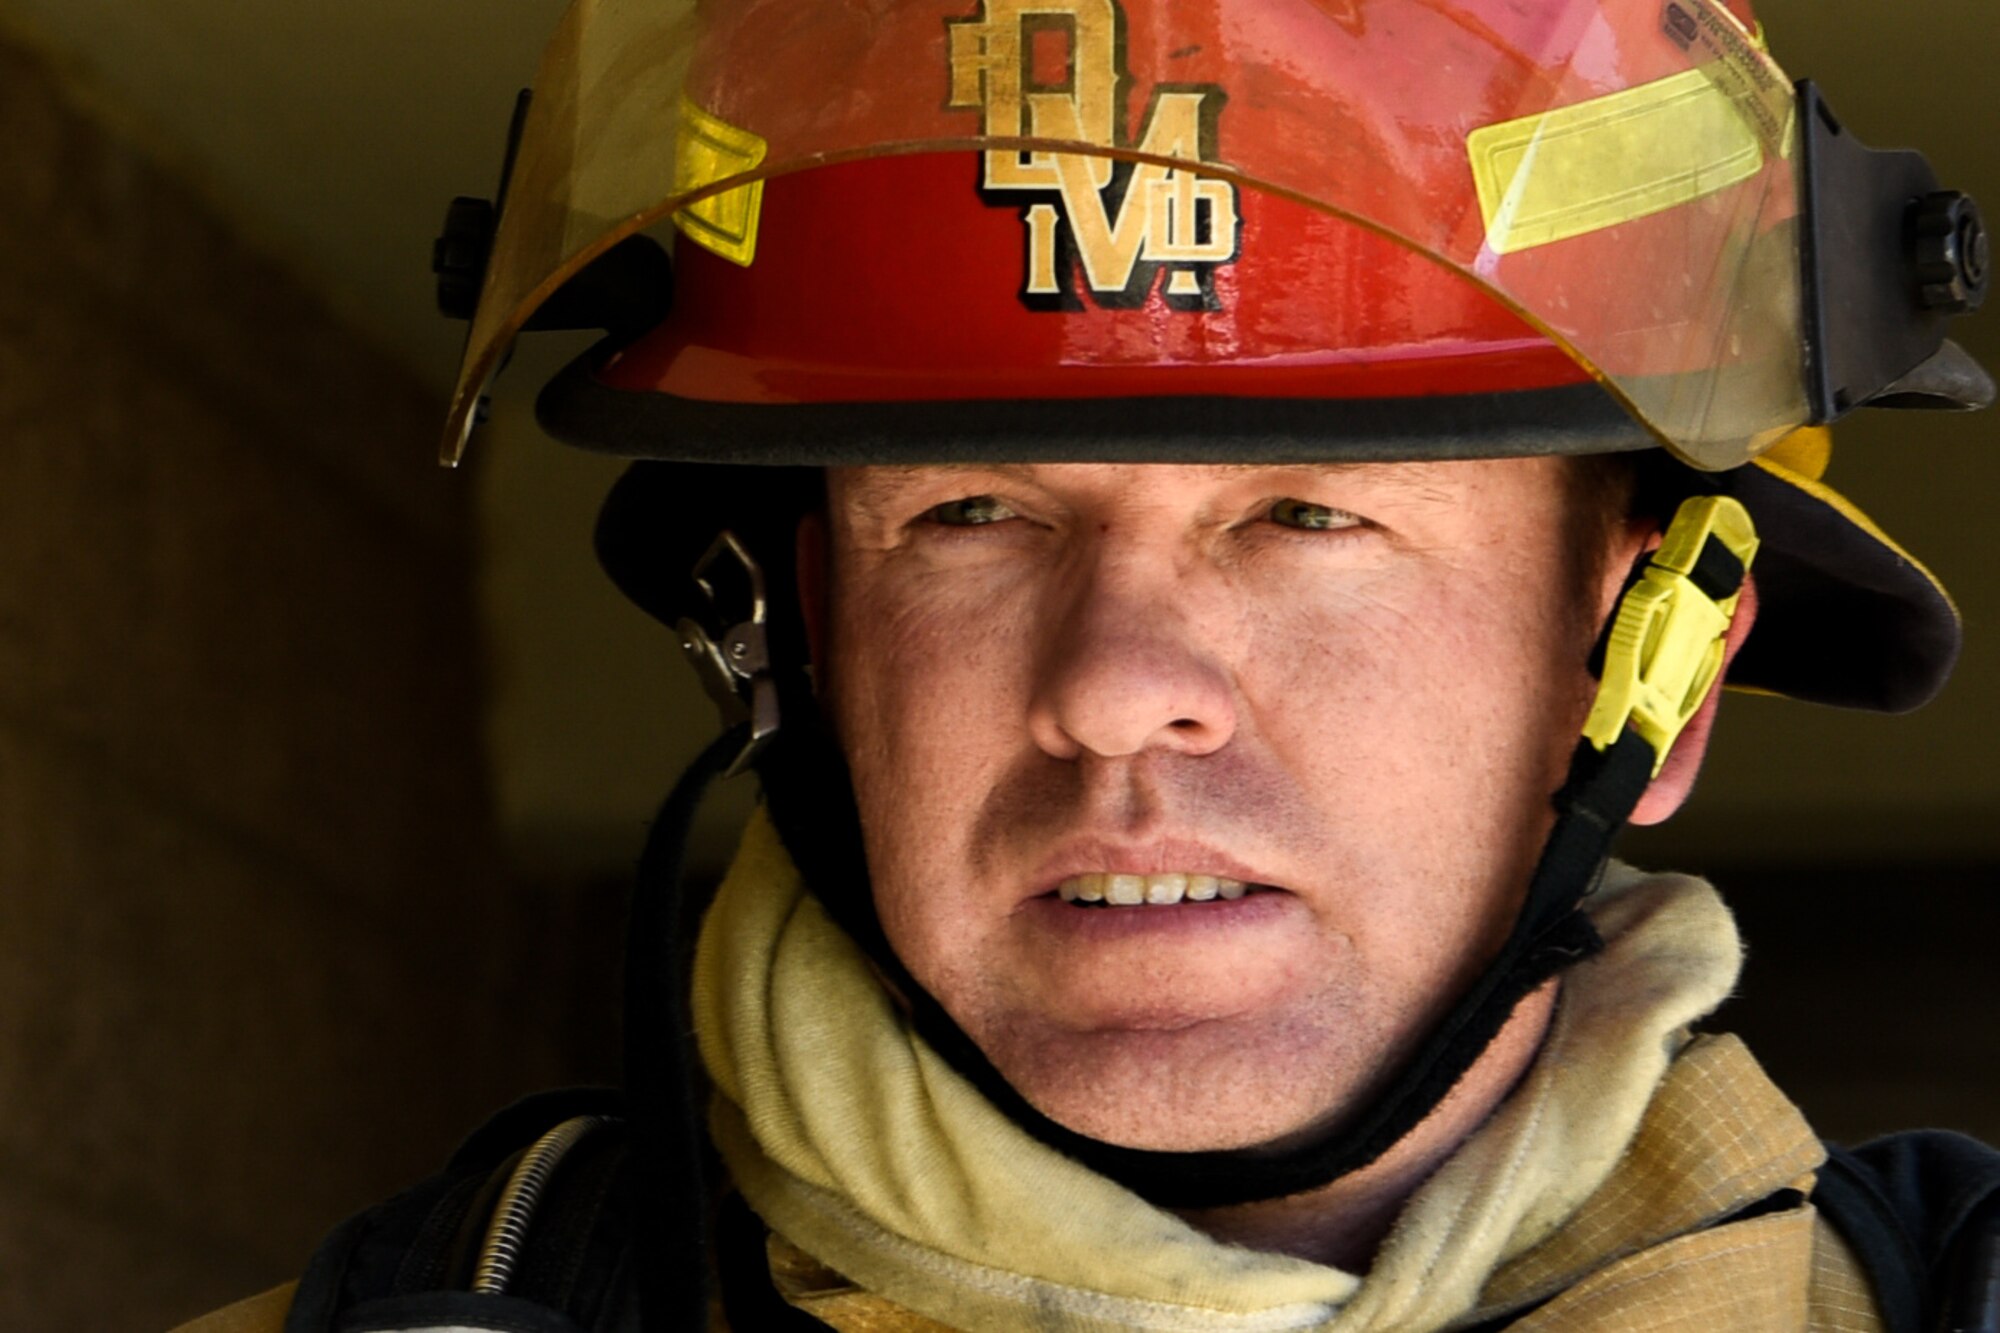 A firefighter watches team members during a joint training exercise May 3, 2019, at Luke Air Force Base, Ariz. Multi-company standard trainings such as these help firefighters to practice basic operating procedures together so they can be effectively used in real world situations. (U.S. Air Force photo by Airman 1st Class Zoie Cox)